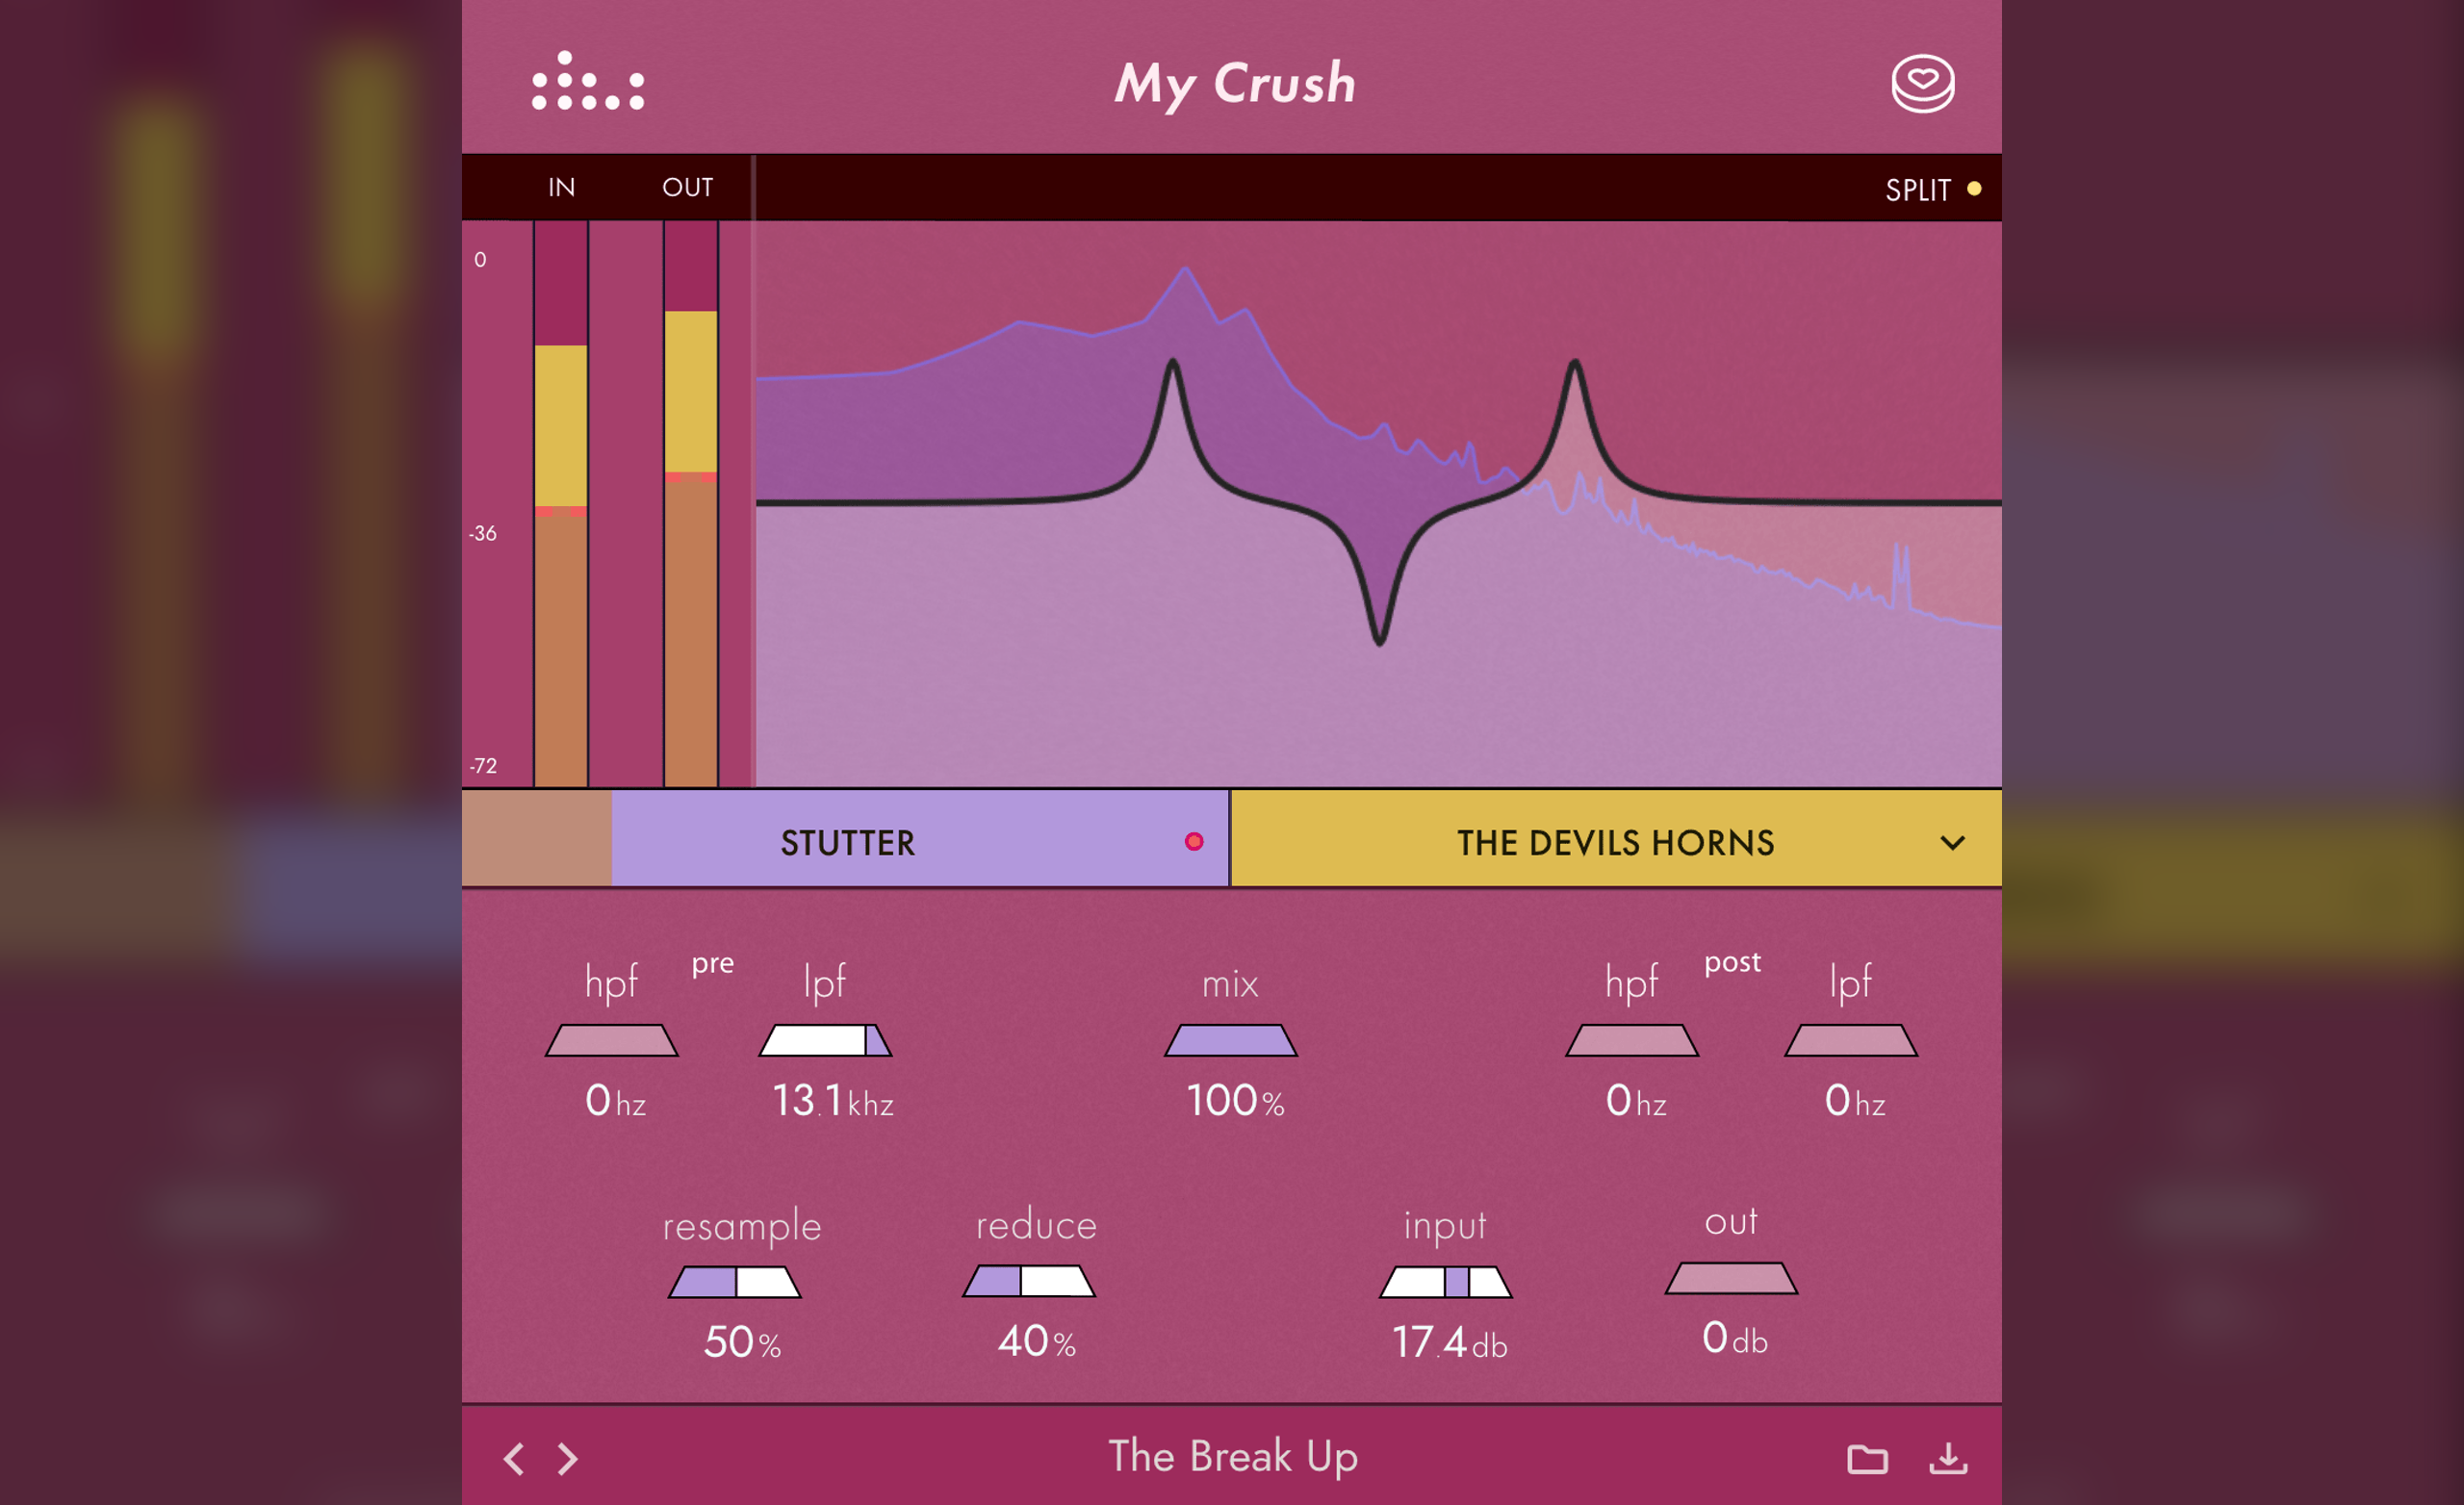 Bitcrusher ‘My Crush’ is free for all ‘denise’ newsletter subscribers